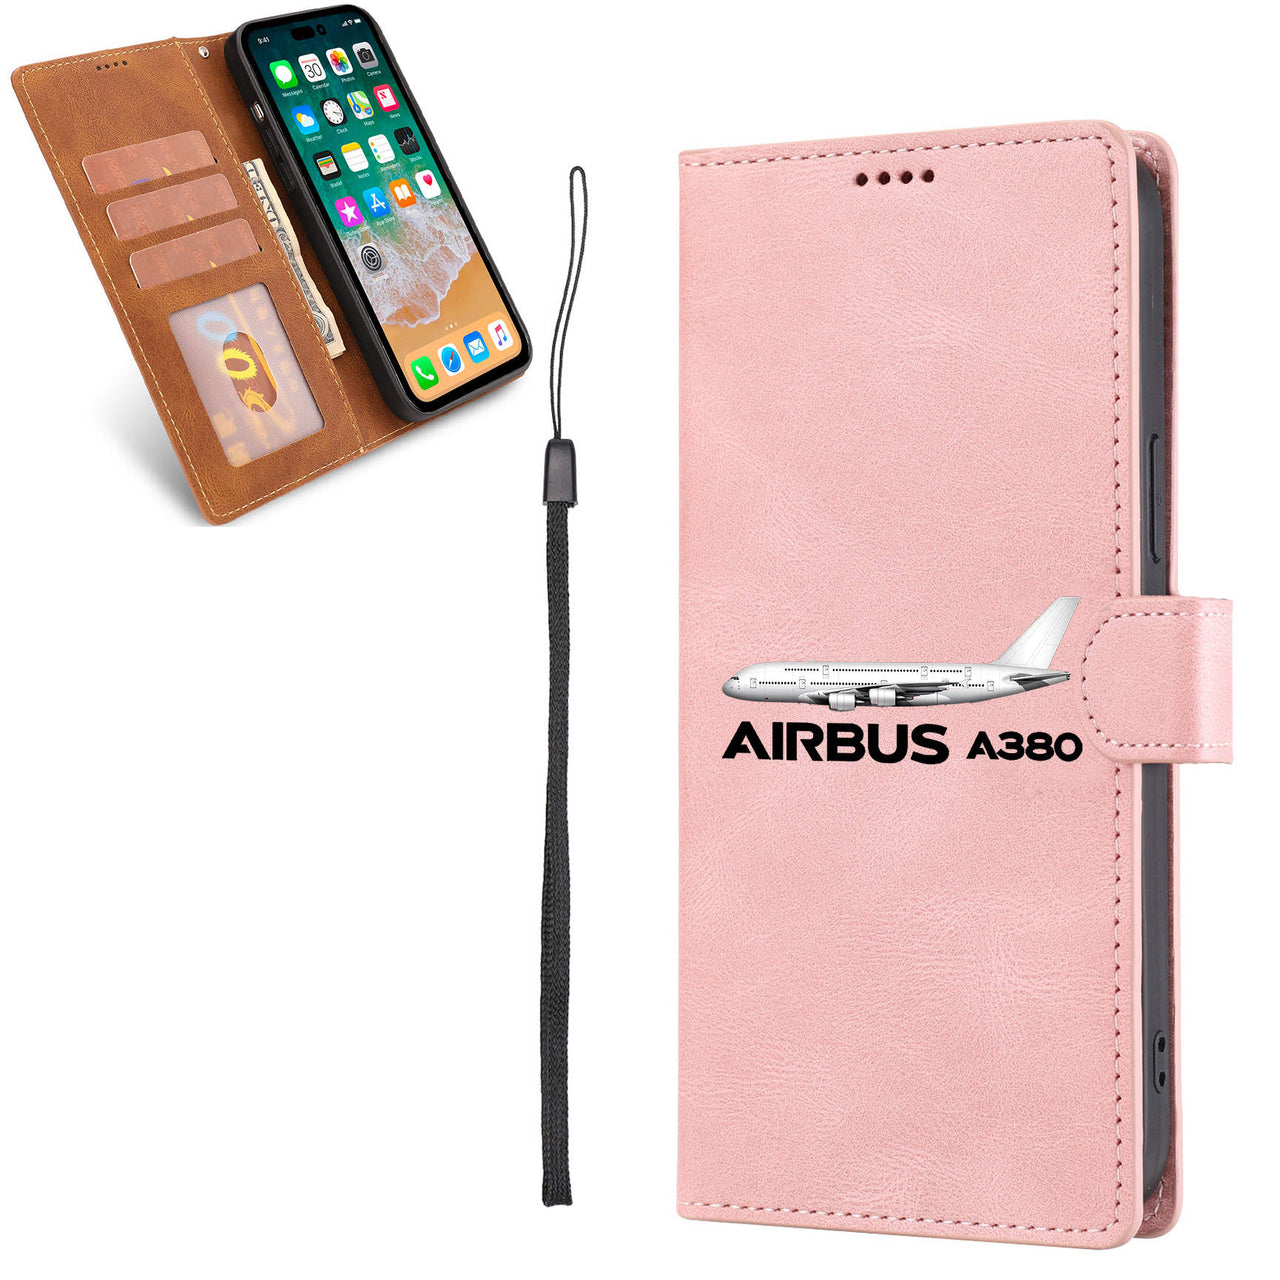 The Airbus A380 Designed Leather iPhone Cases